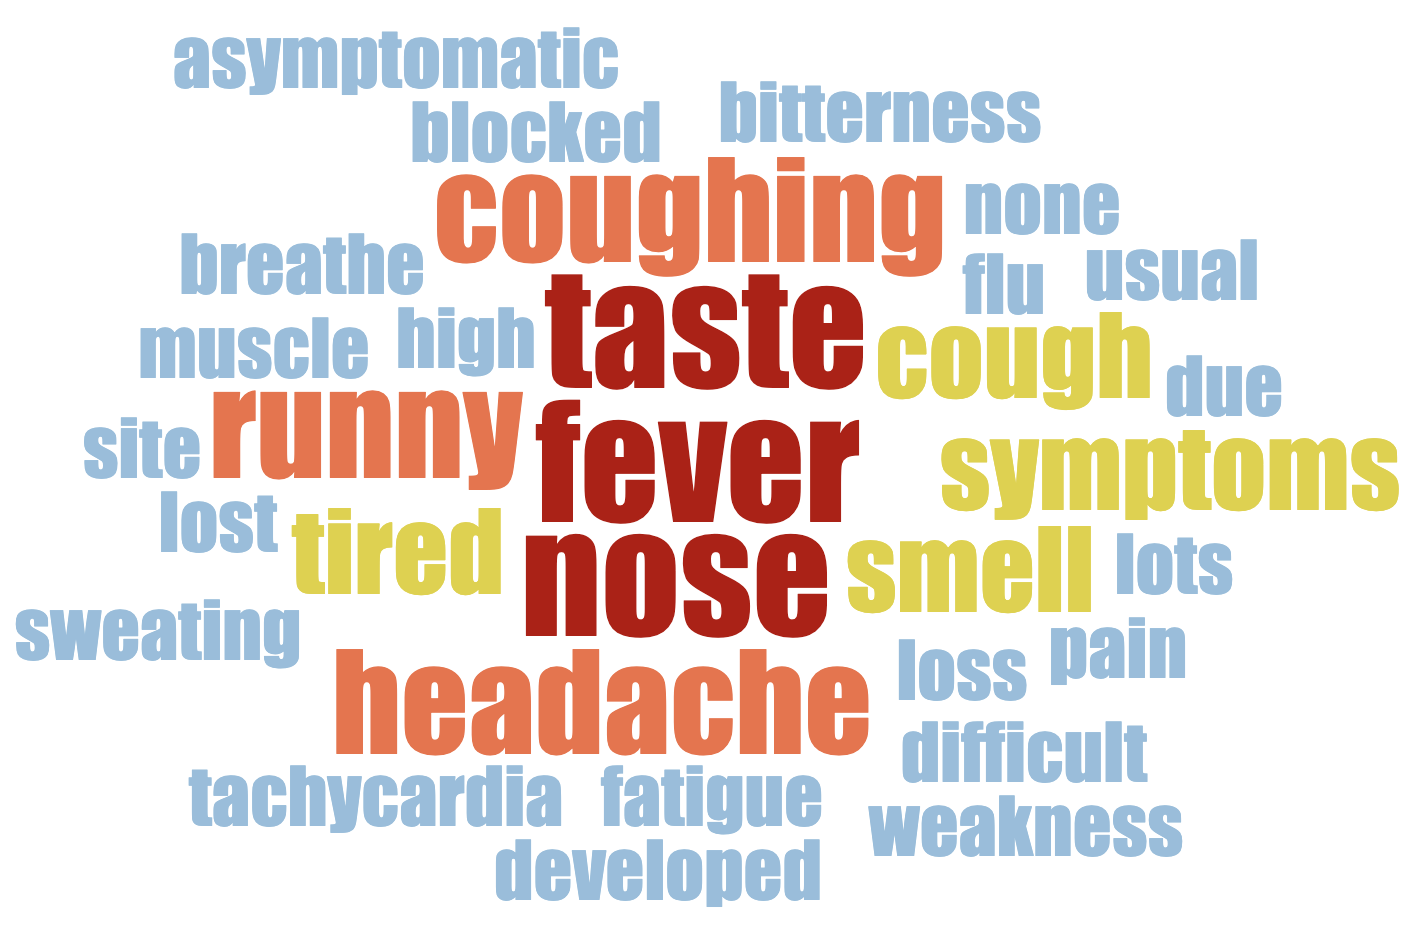 Could you tell us about your symptoms?